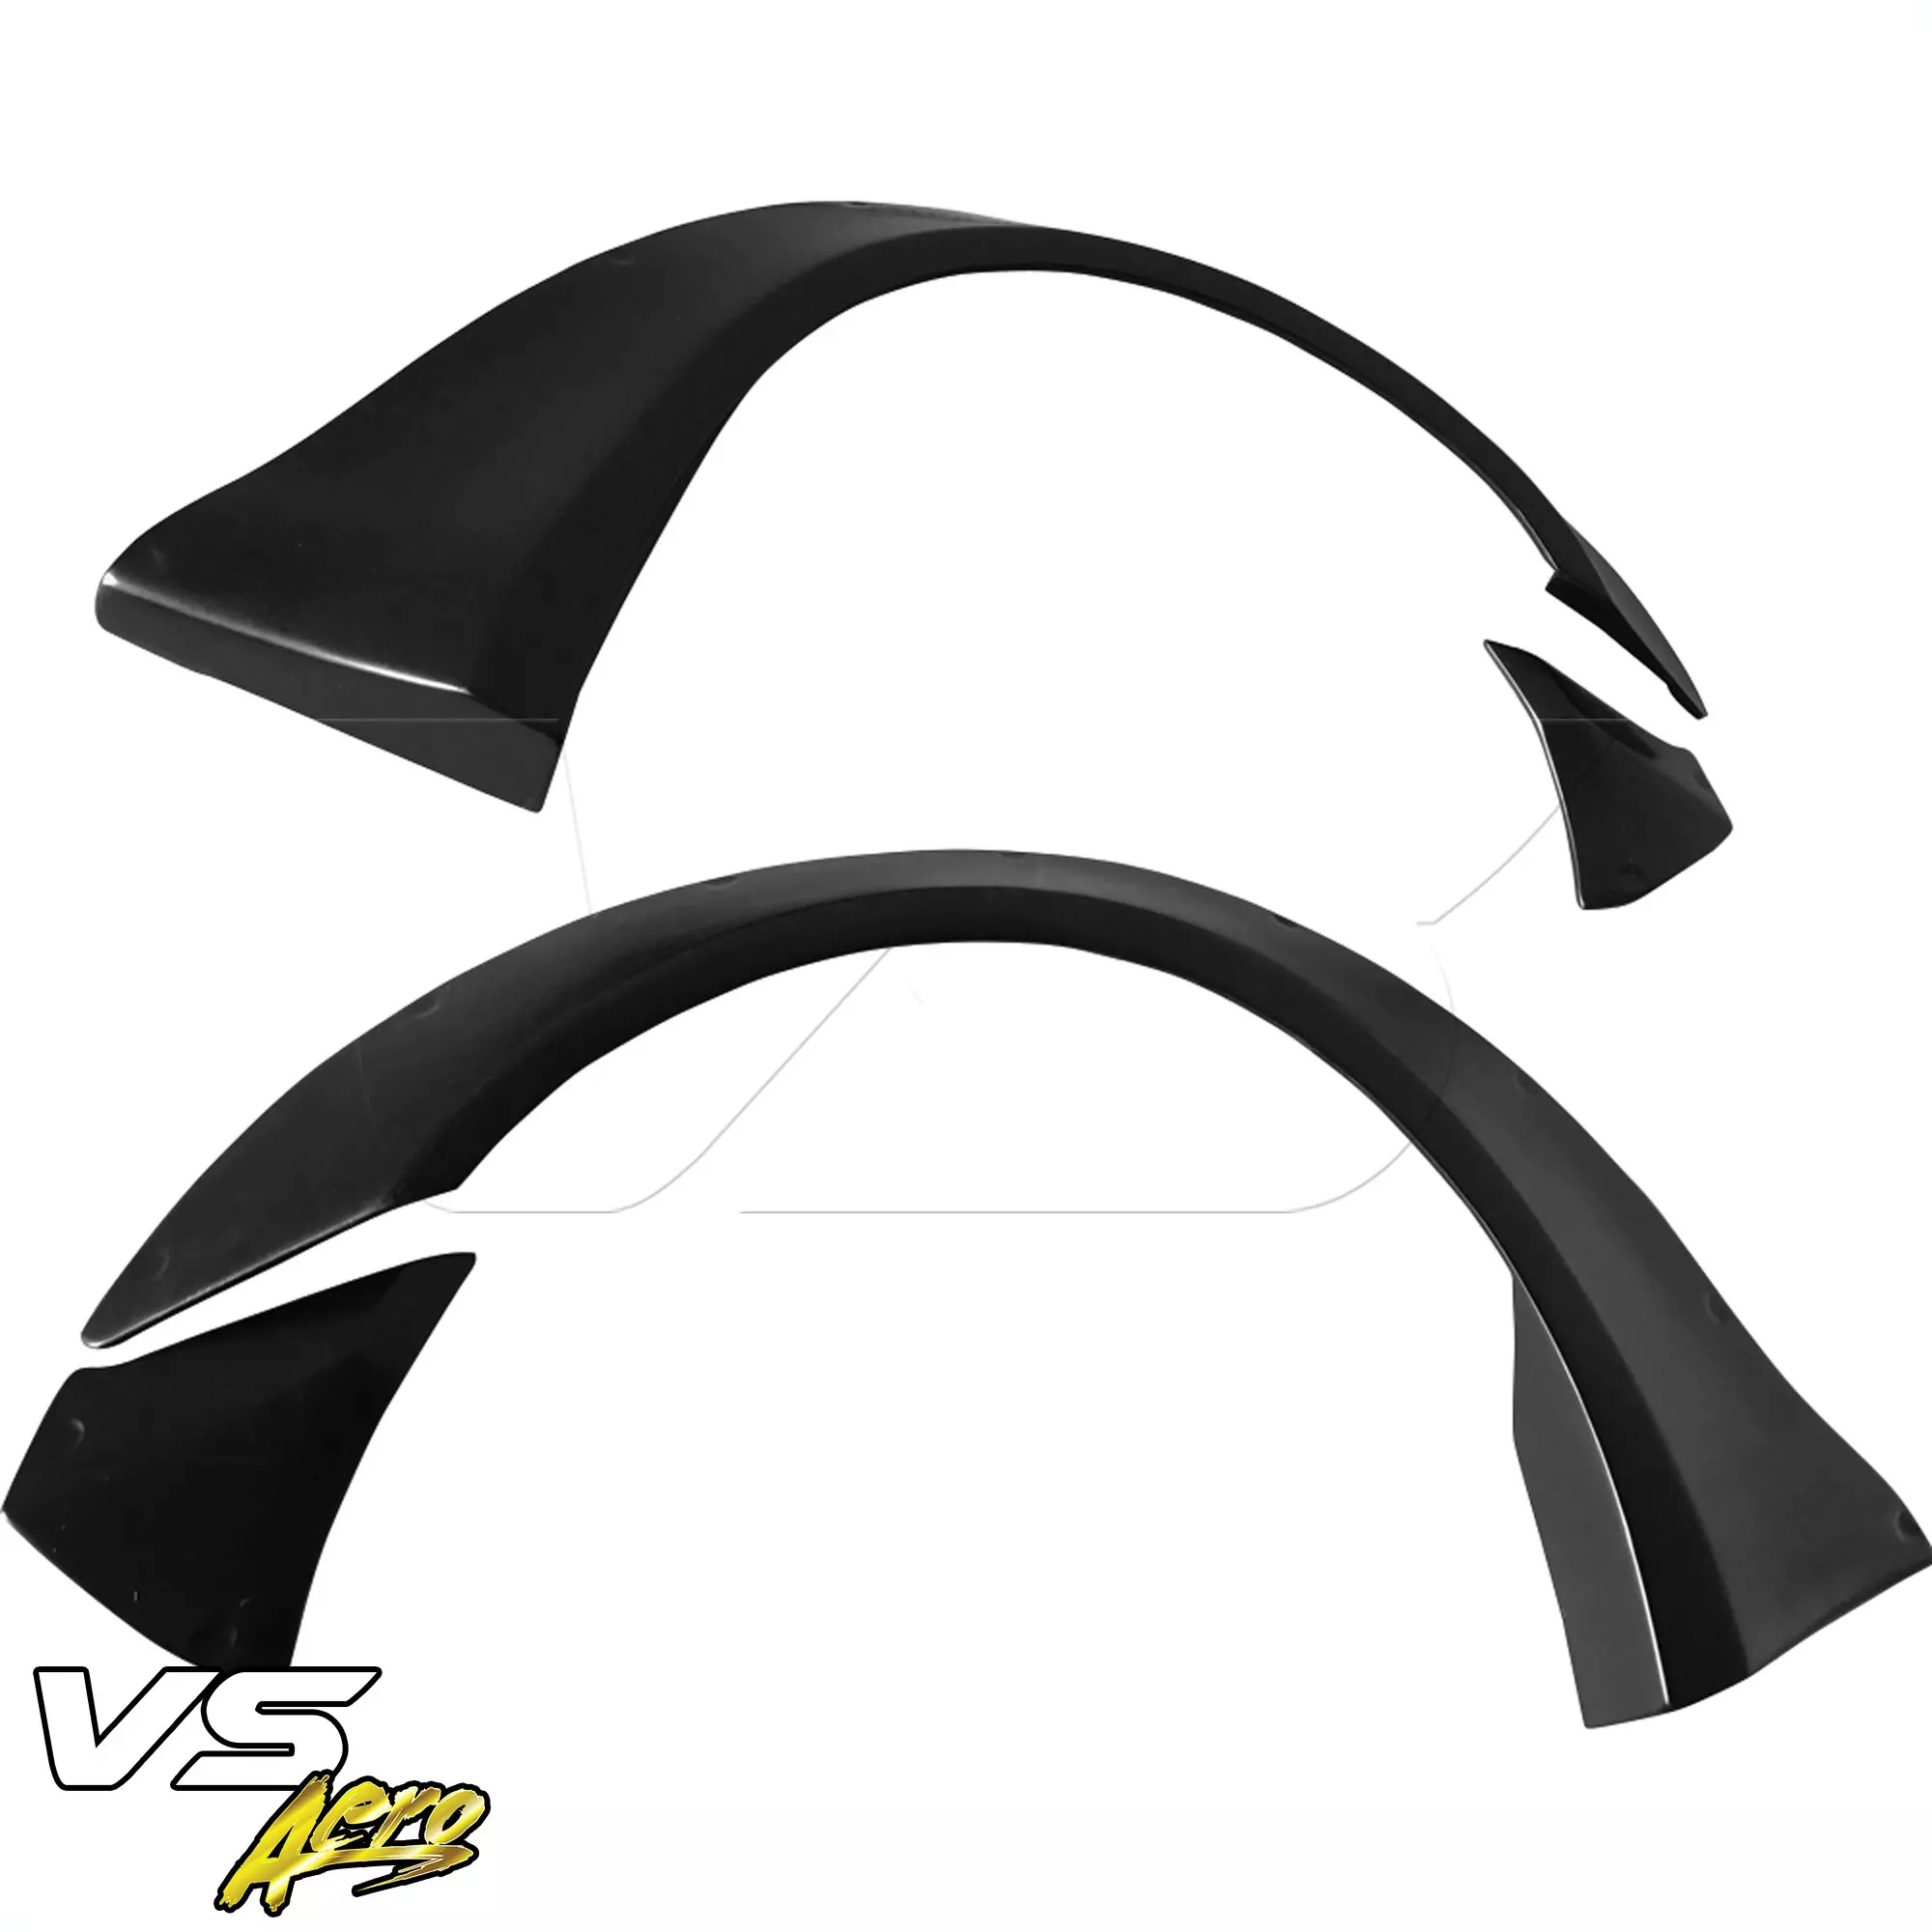 VSaero FRP LBPE Wide Body Fender Flares (front) 4pc > Infiniti G37 Coupe 2008-2015 > 2dr Coupe - Image 18